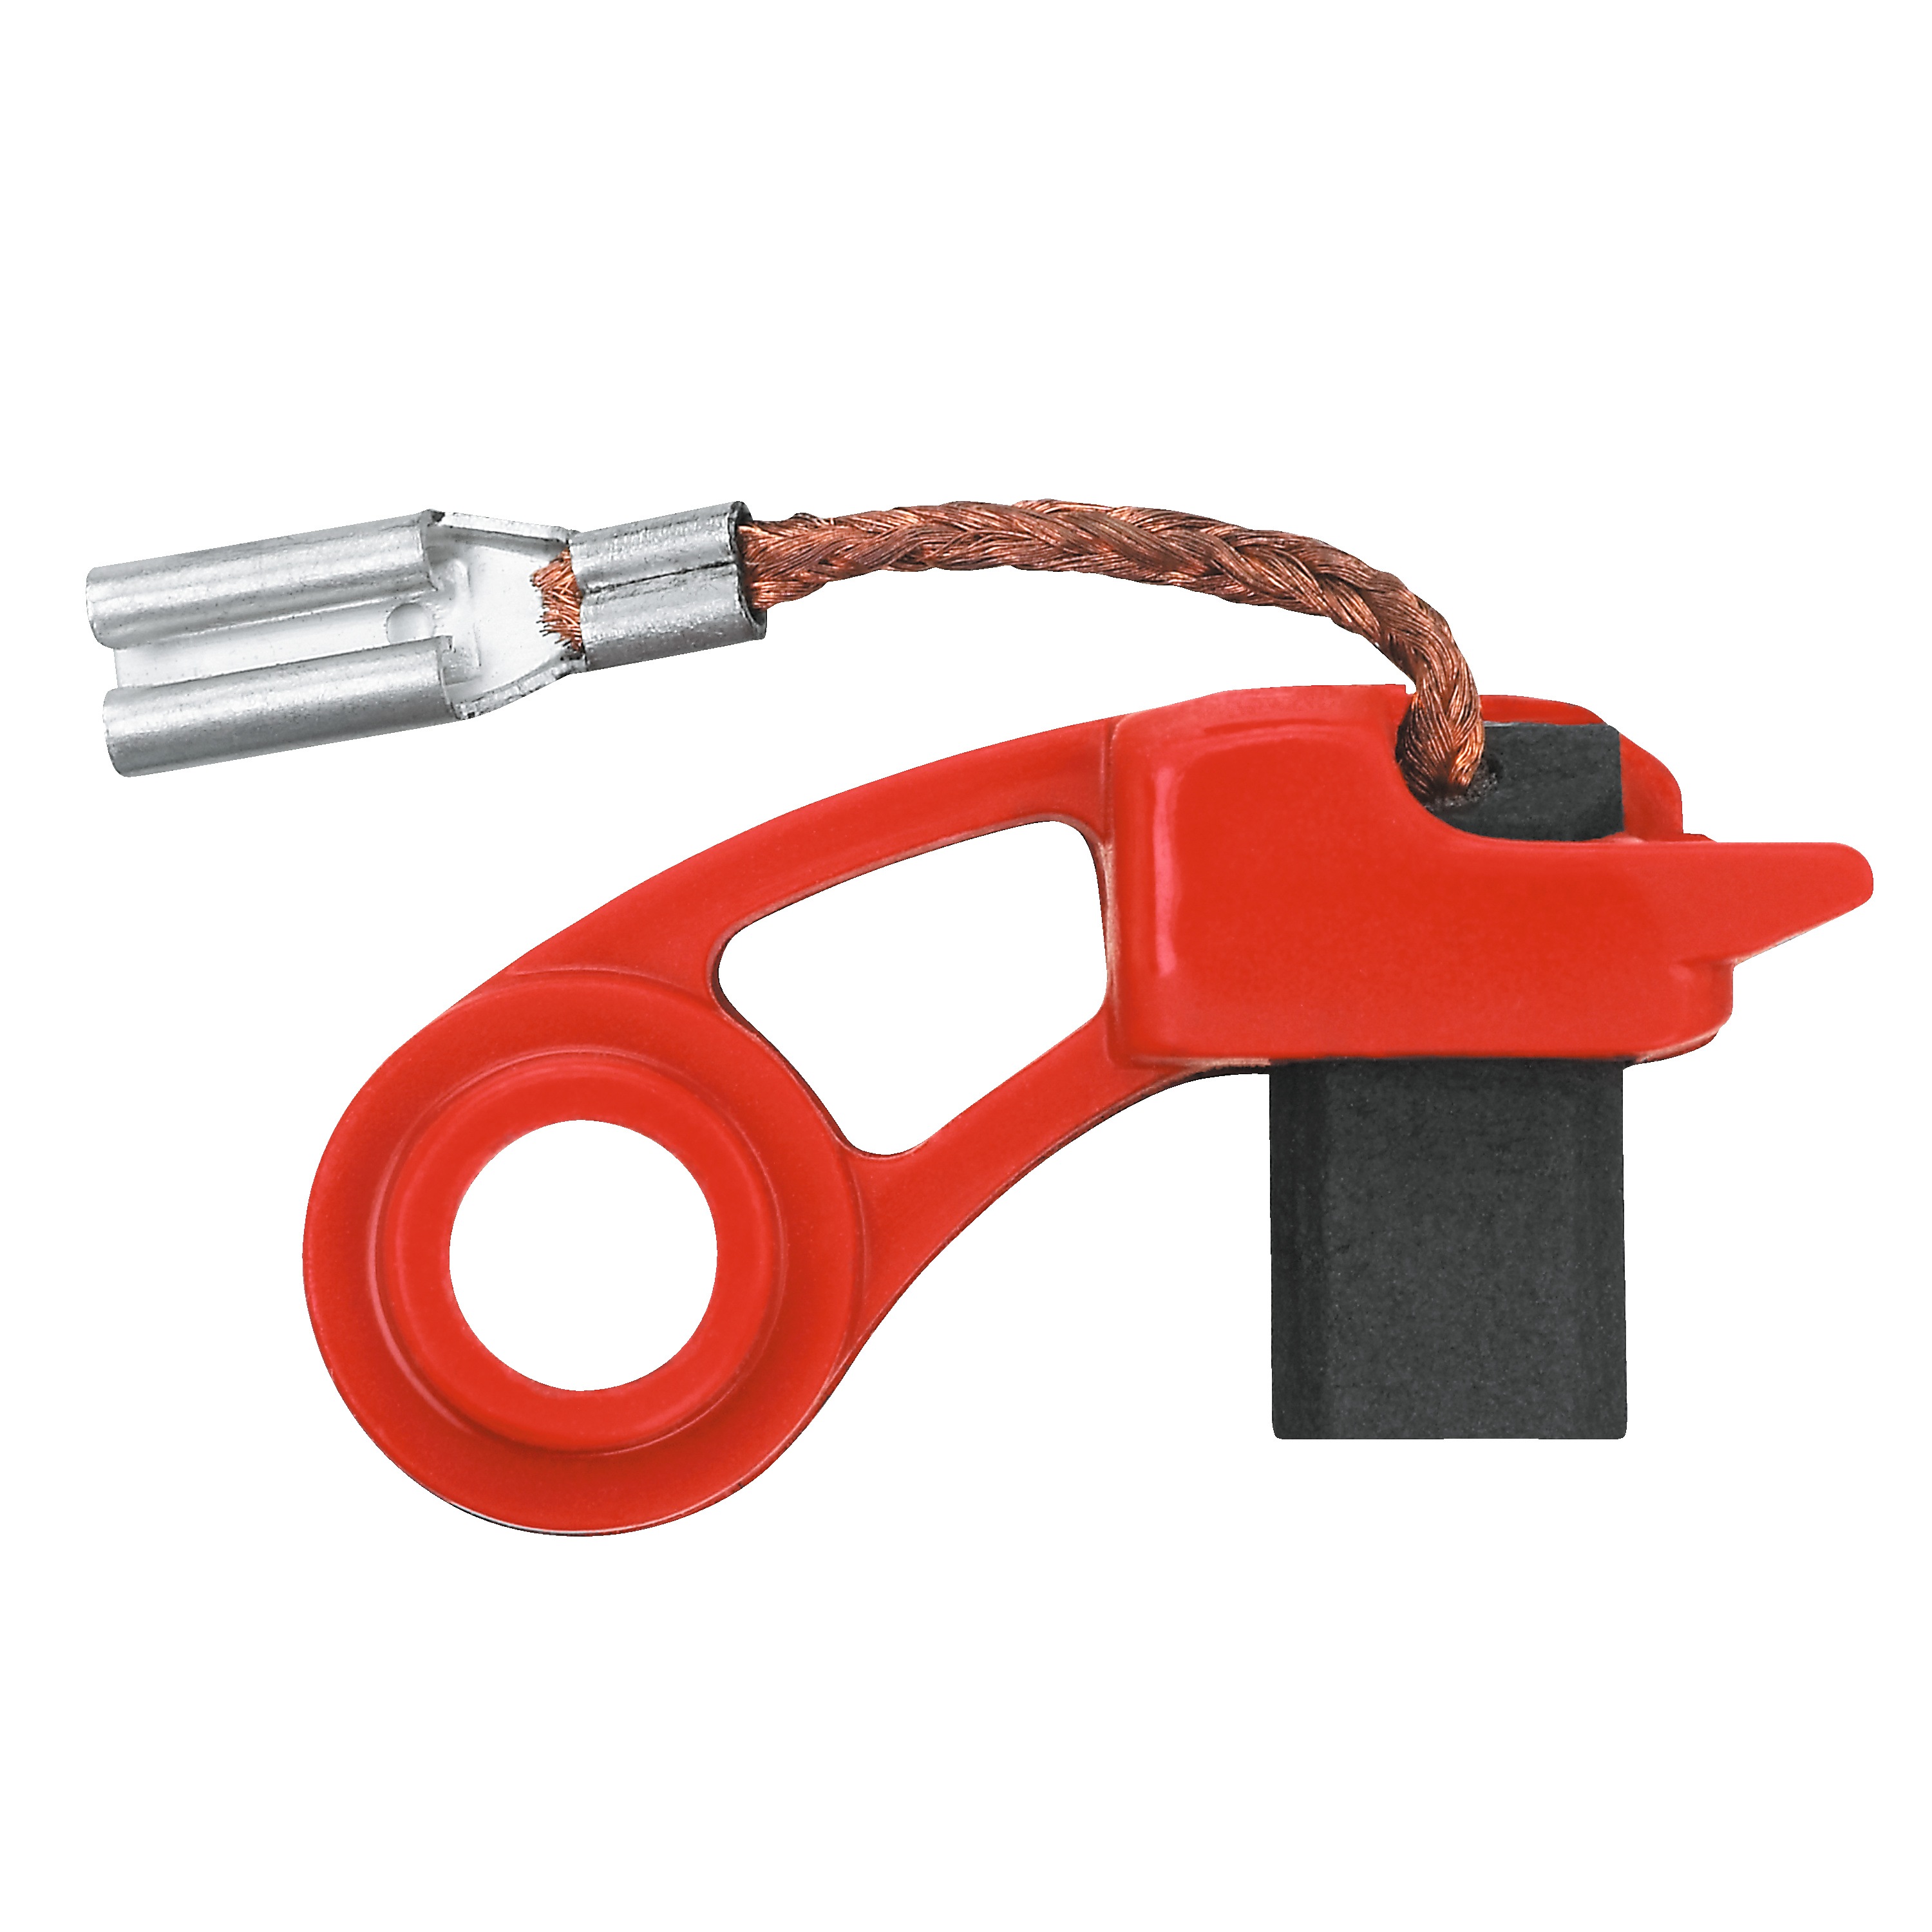 Handle of  Small Angle Grinder